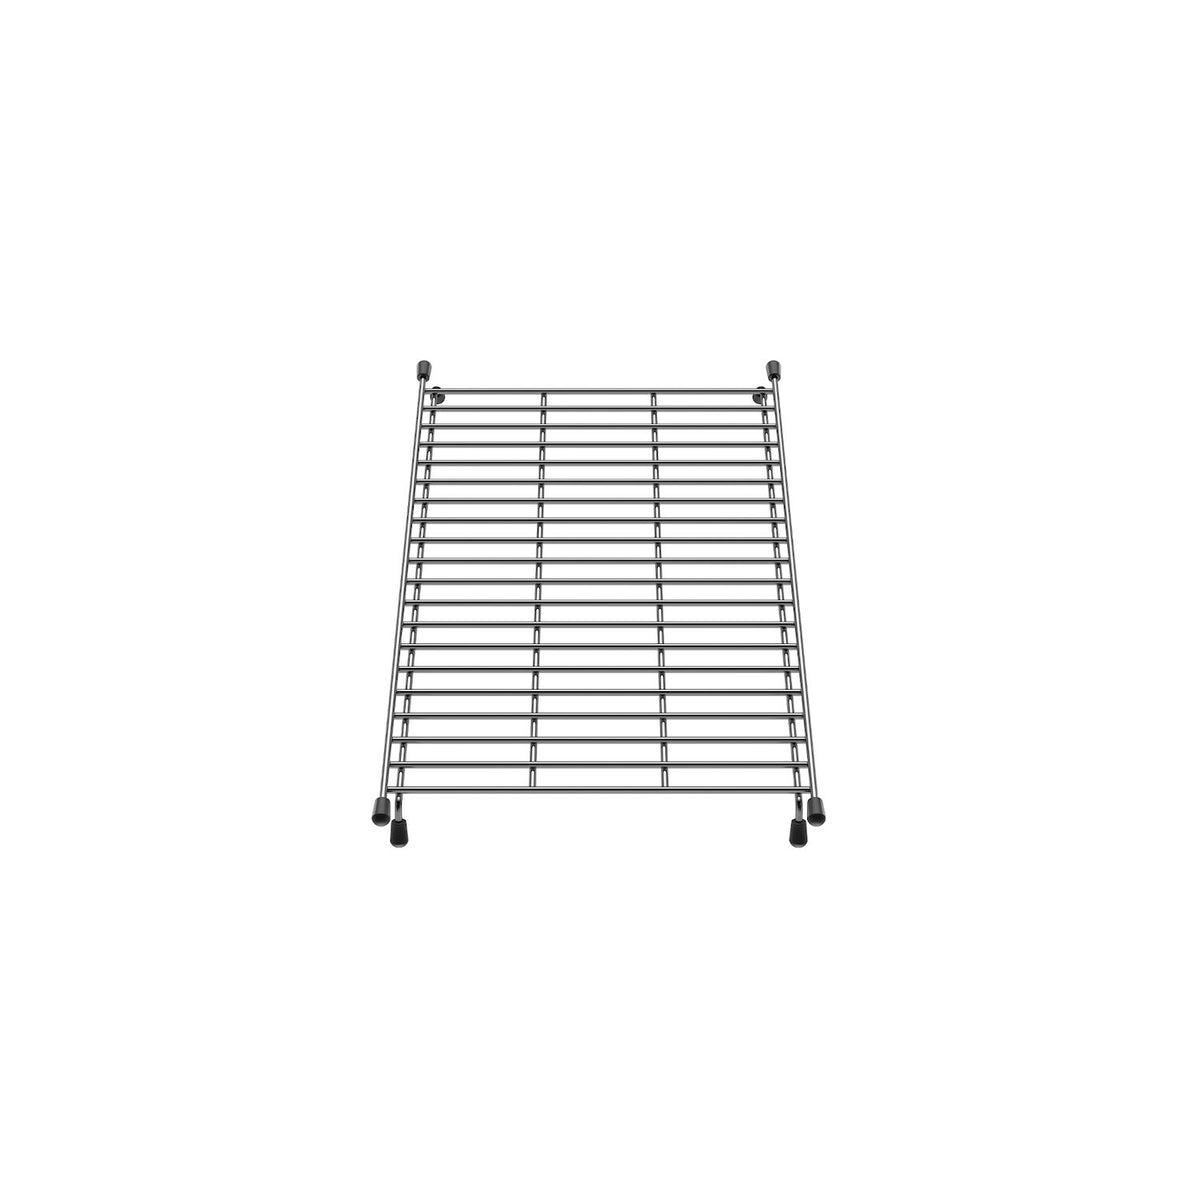 PRECIS 10"x 15" FLOATING STAINLESS STEEL SINK GRID